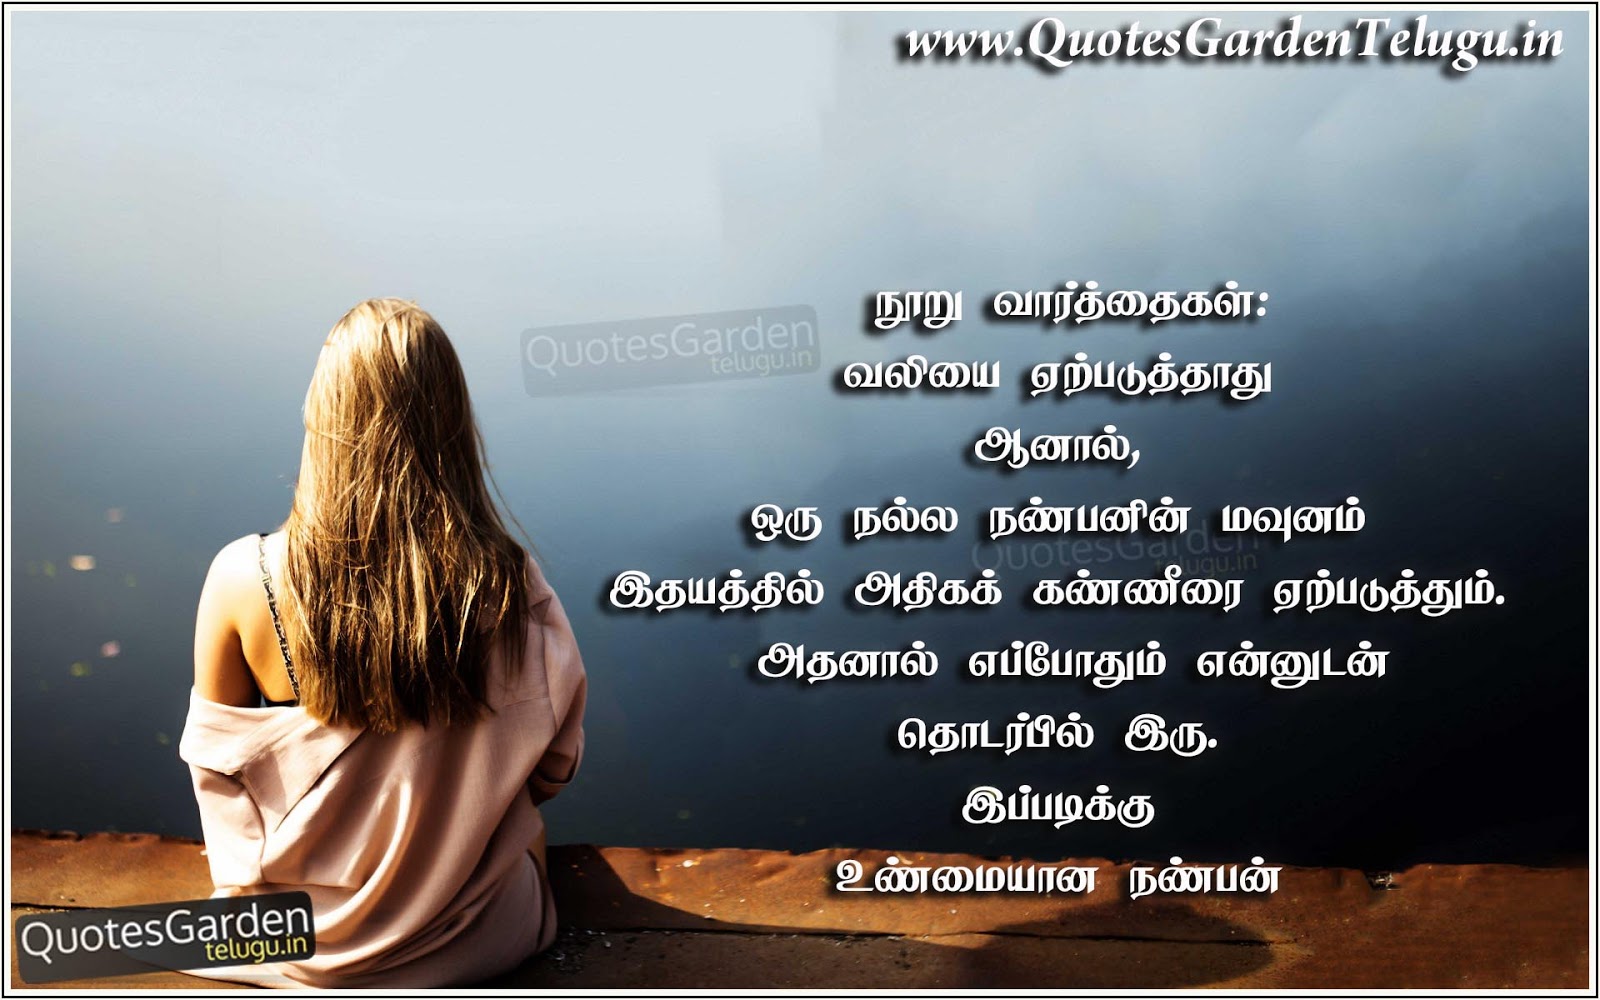 Heart touching Quotes in Tamil  QUOTES GARDEN TELUGU 